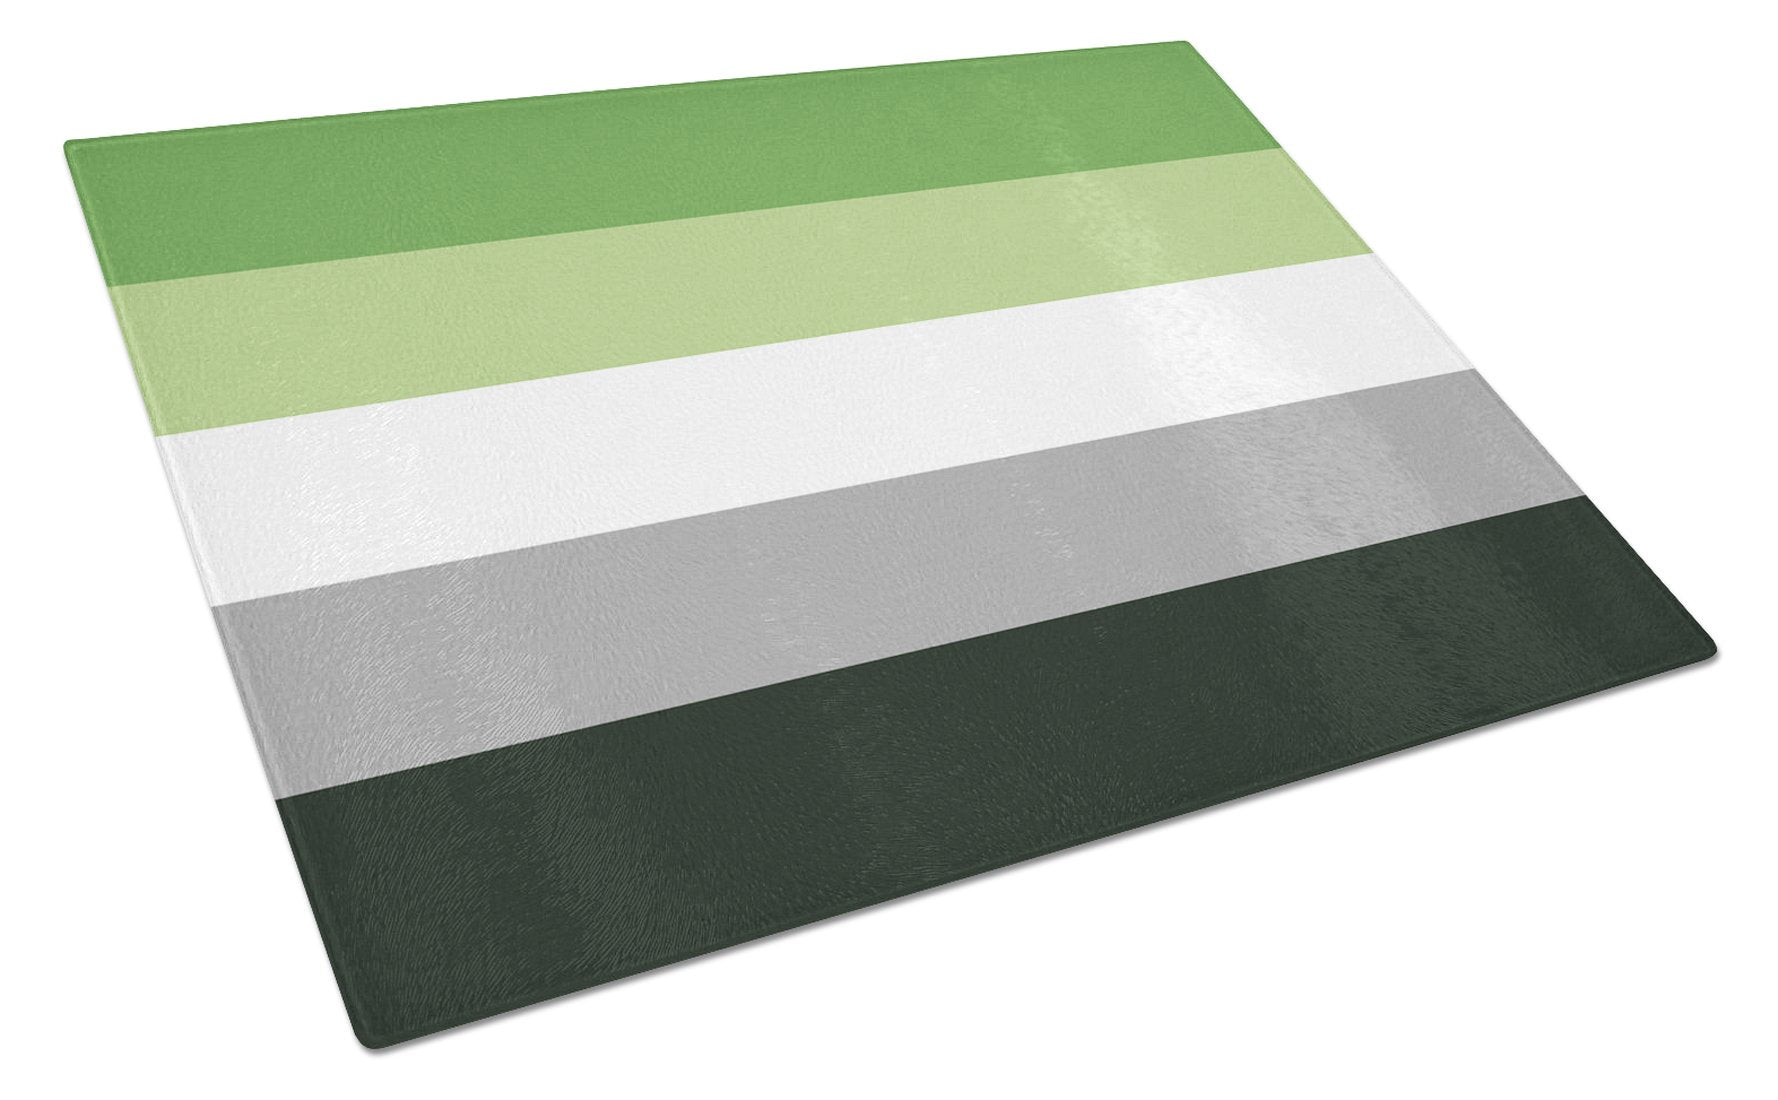 Buy this Aronmantic Pride Glass Cutting Board Large